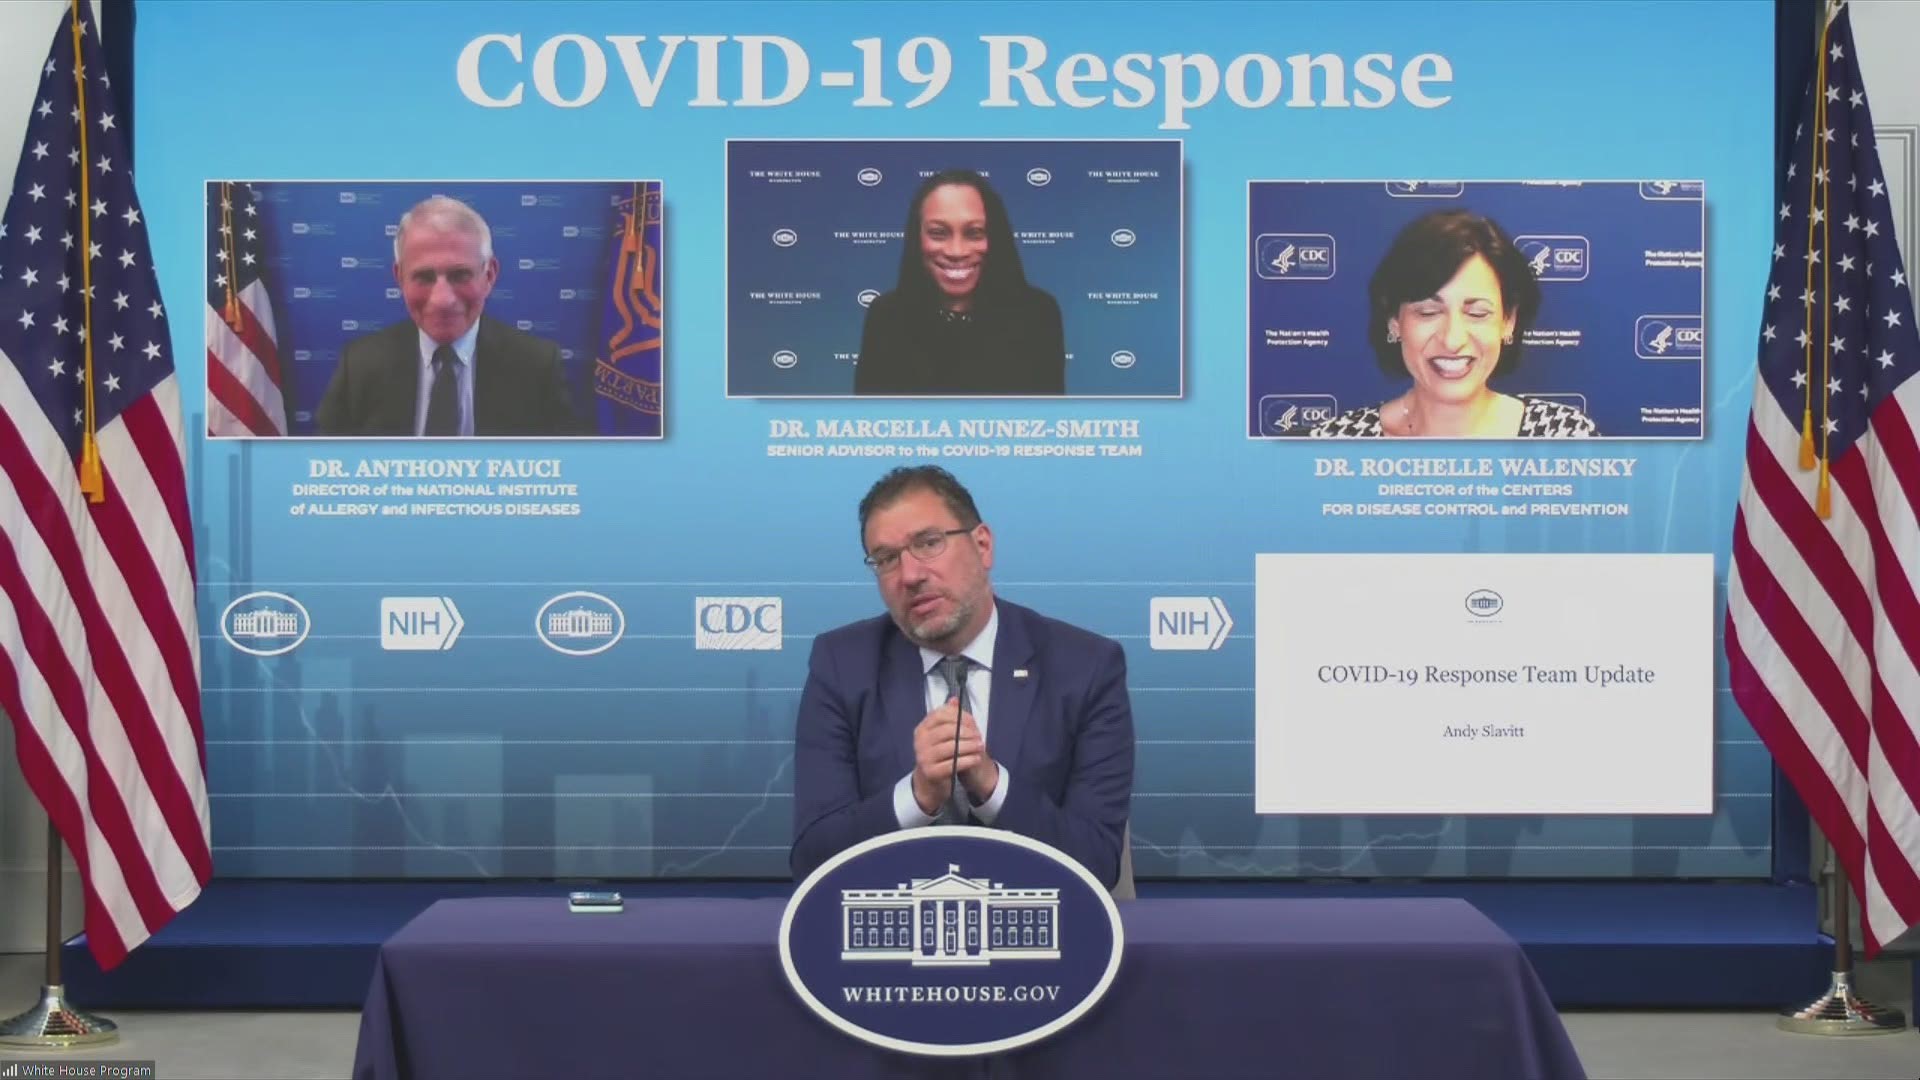 Andy Slavitt, White House Senior Advisor for COVID-19 Response, urges Americans to get vaccinated and opened up about how the coronavirus has impacted his family.